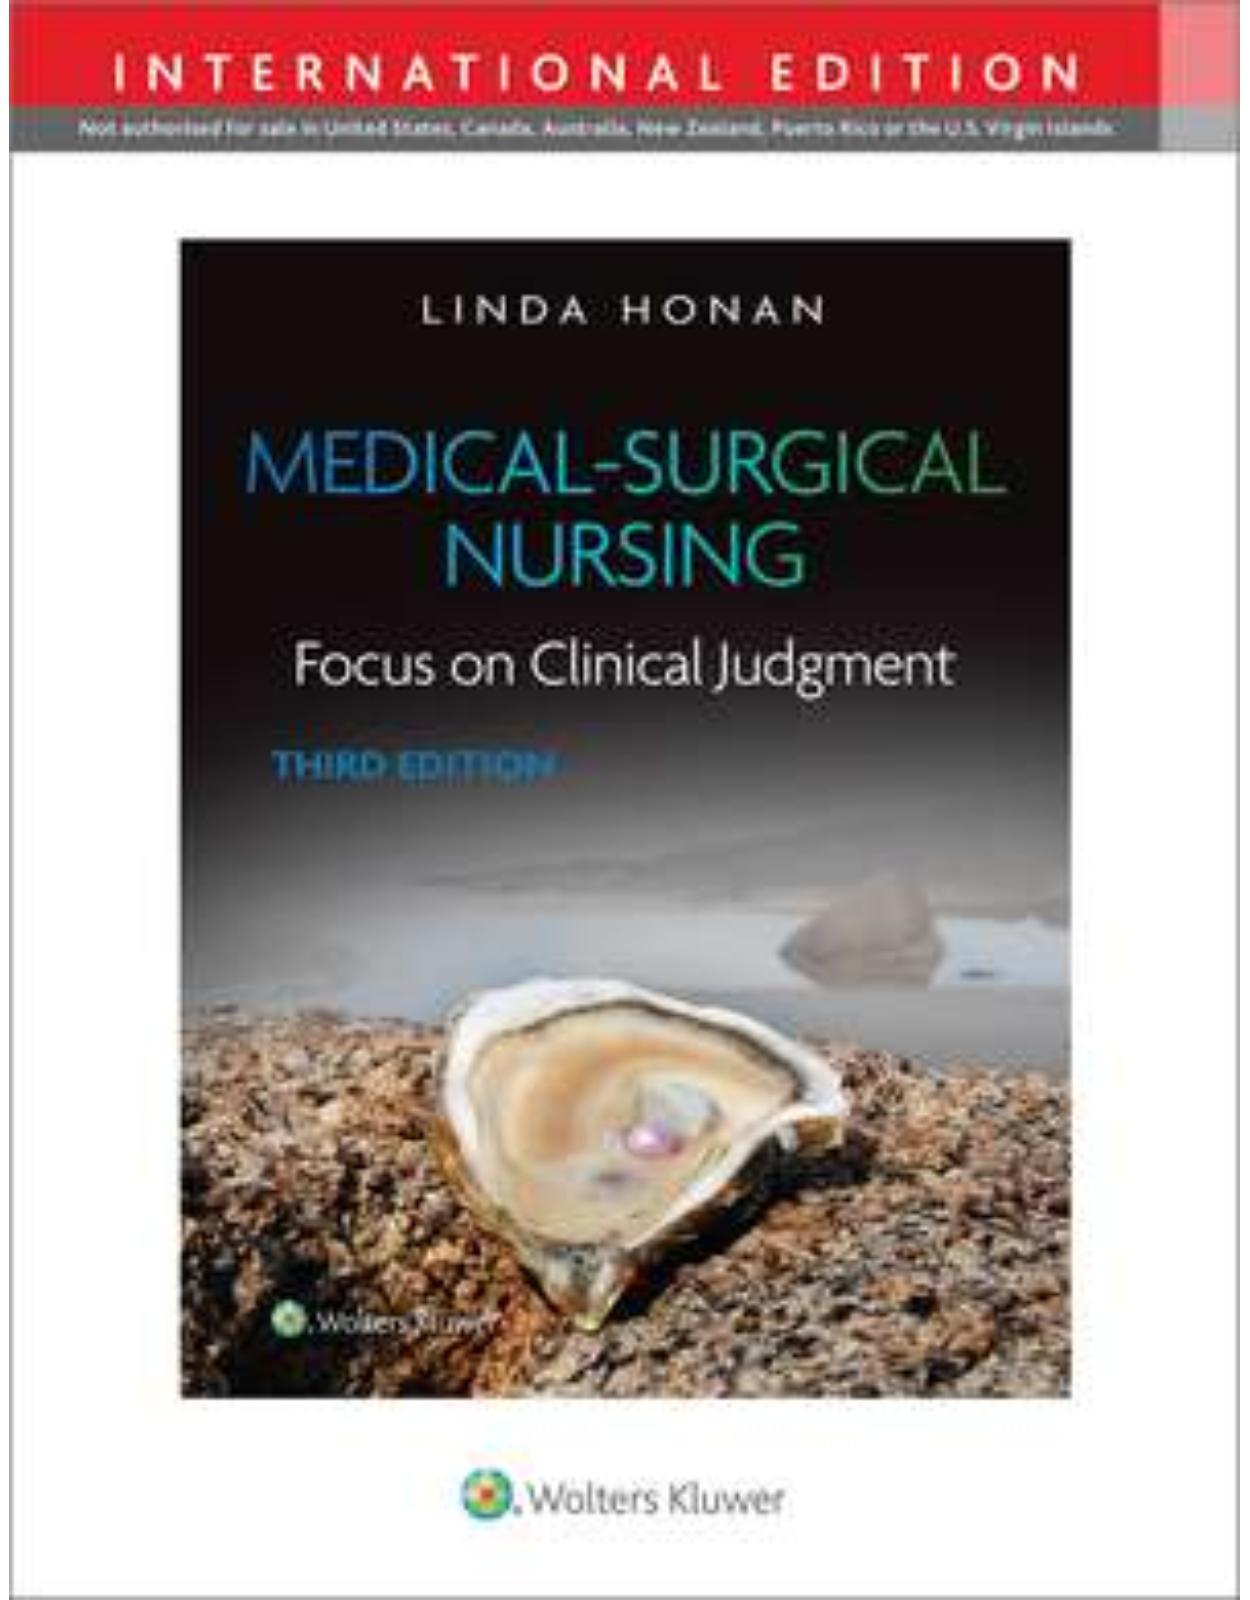 Medical-Surgical Nursing: Focus on Clinical Judgment